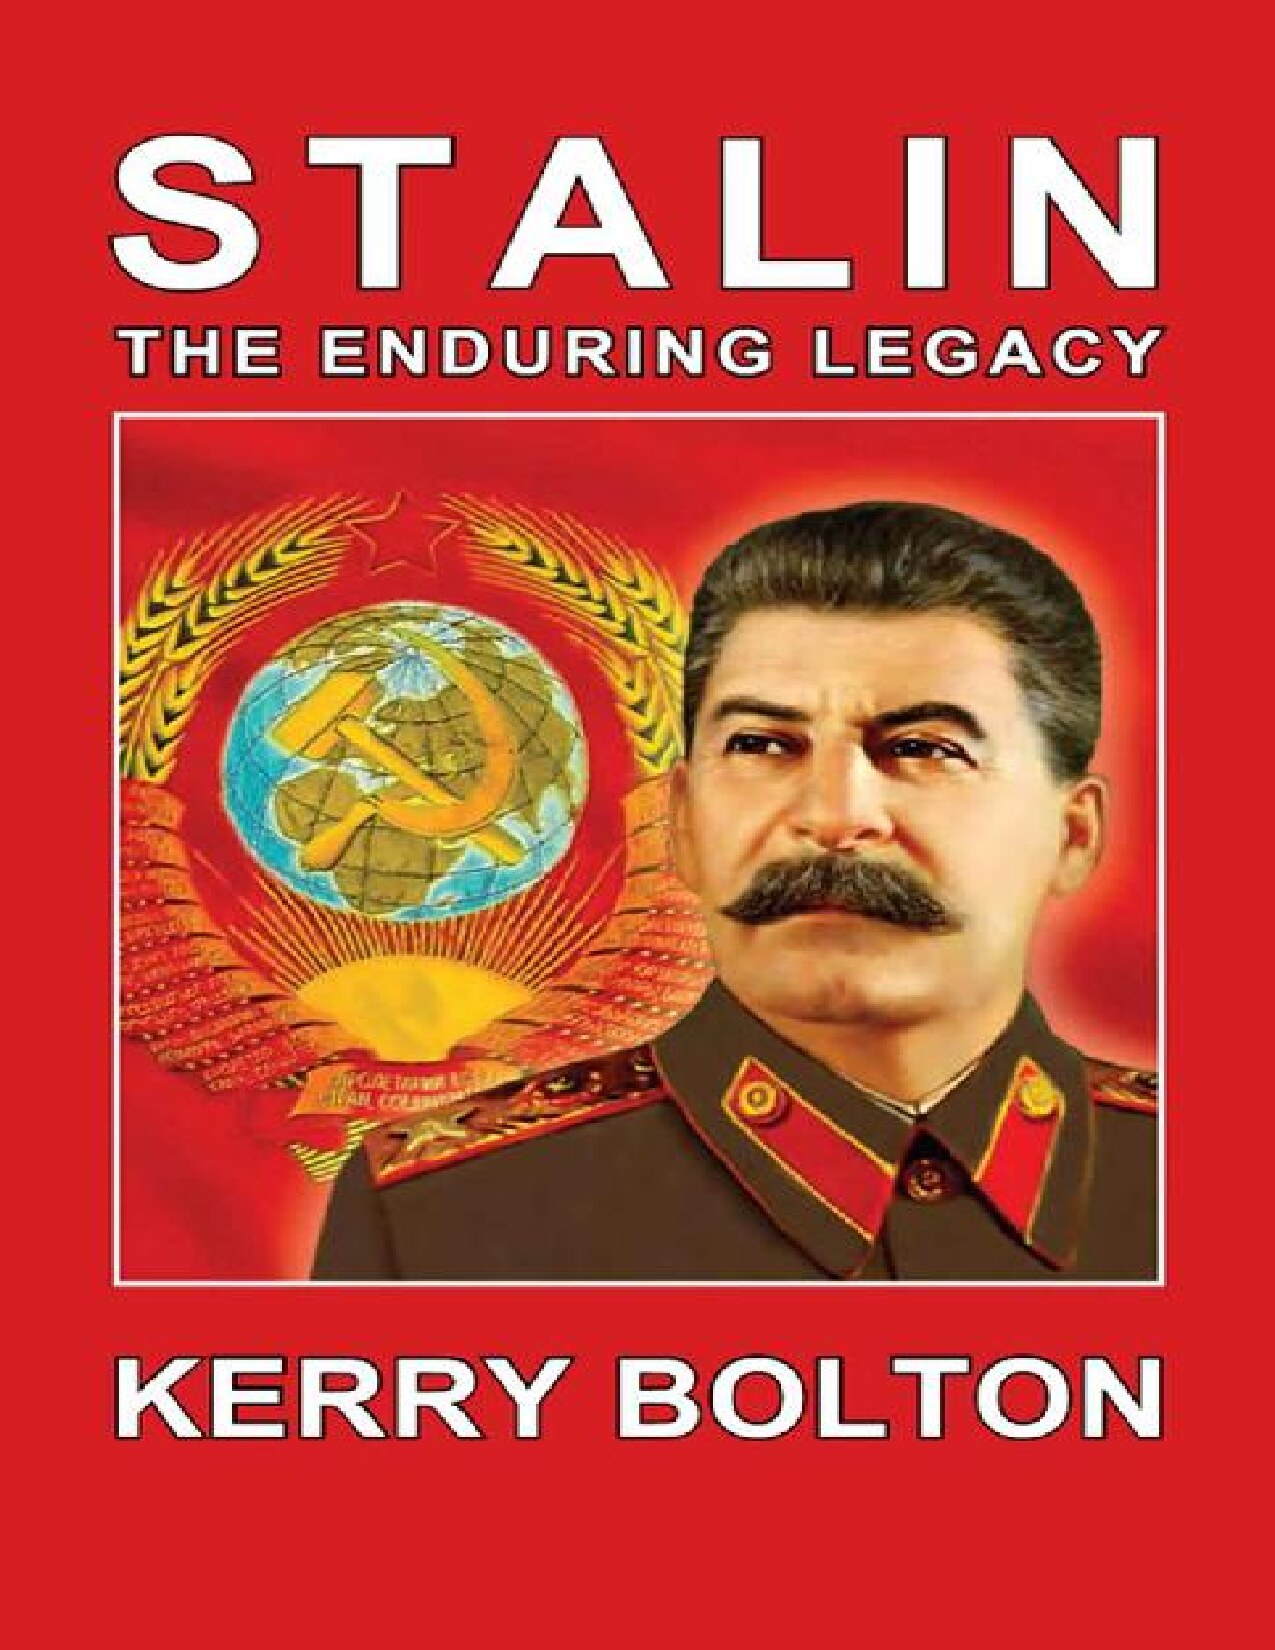 Stalin: The Enduring Legacy